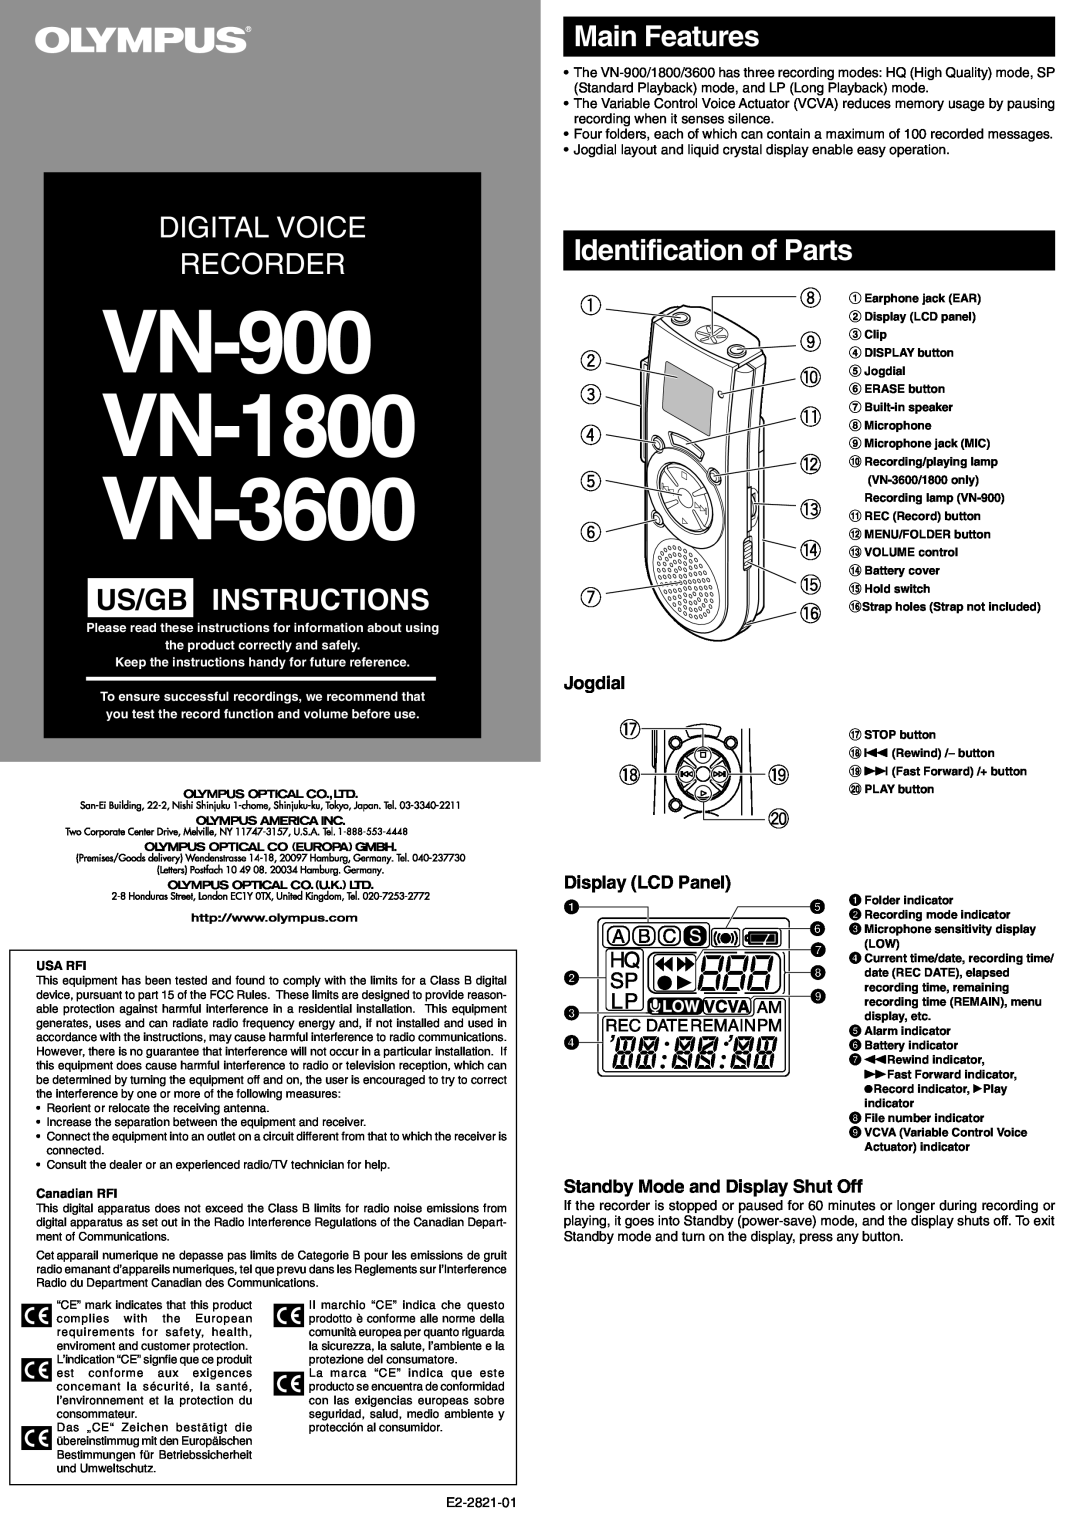 Olympus VN-3600, VN-900 manual Us/Gb Instructions, Main Features, Identification of Parts, Jogdial, Display LCD Panel 